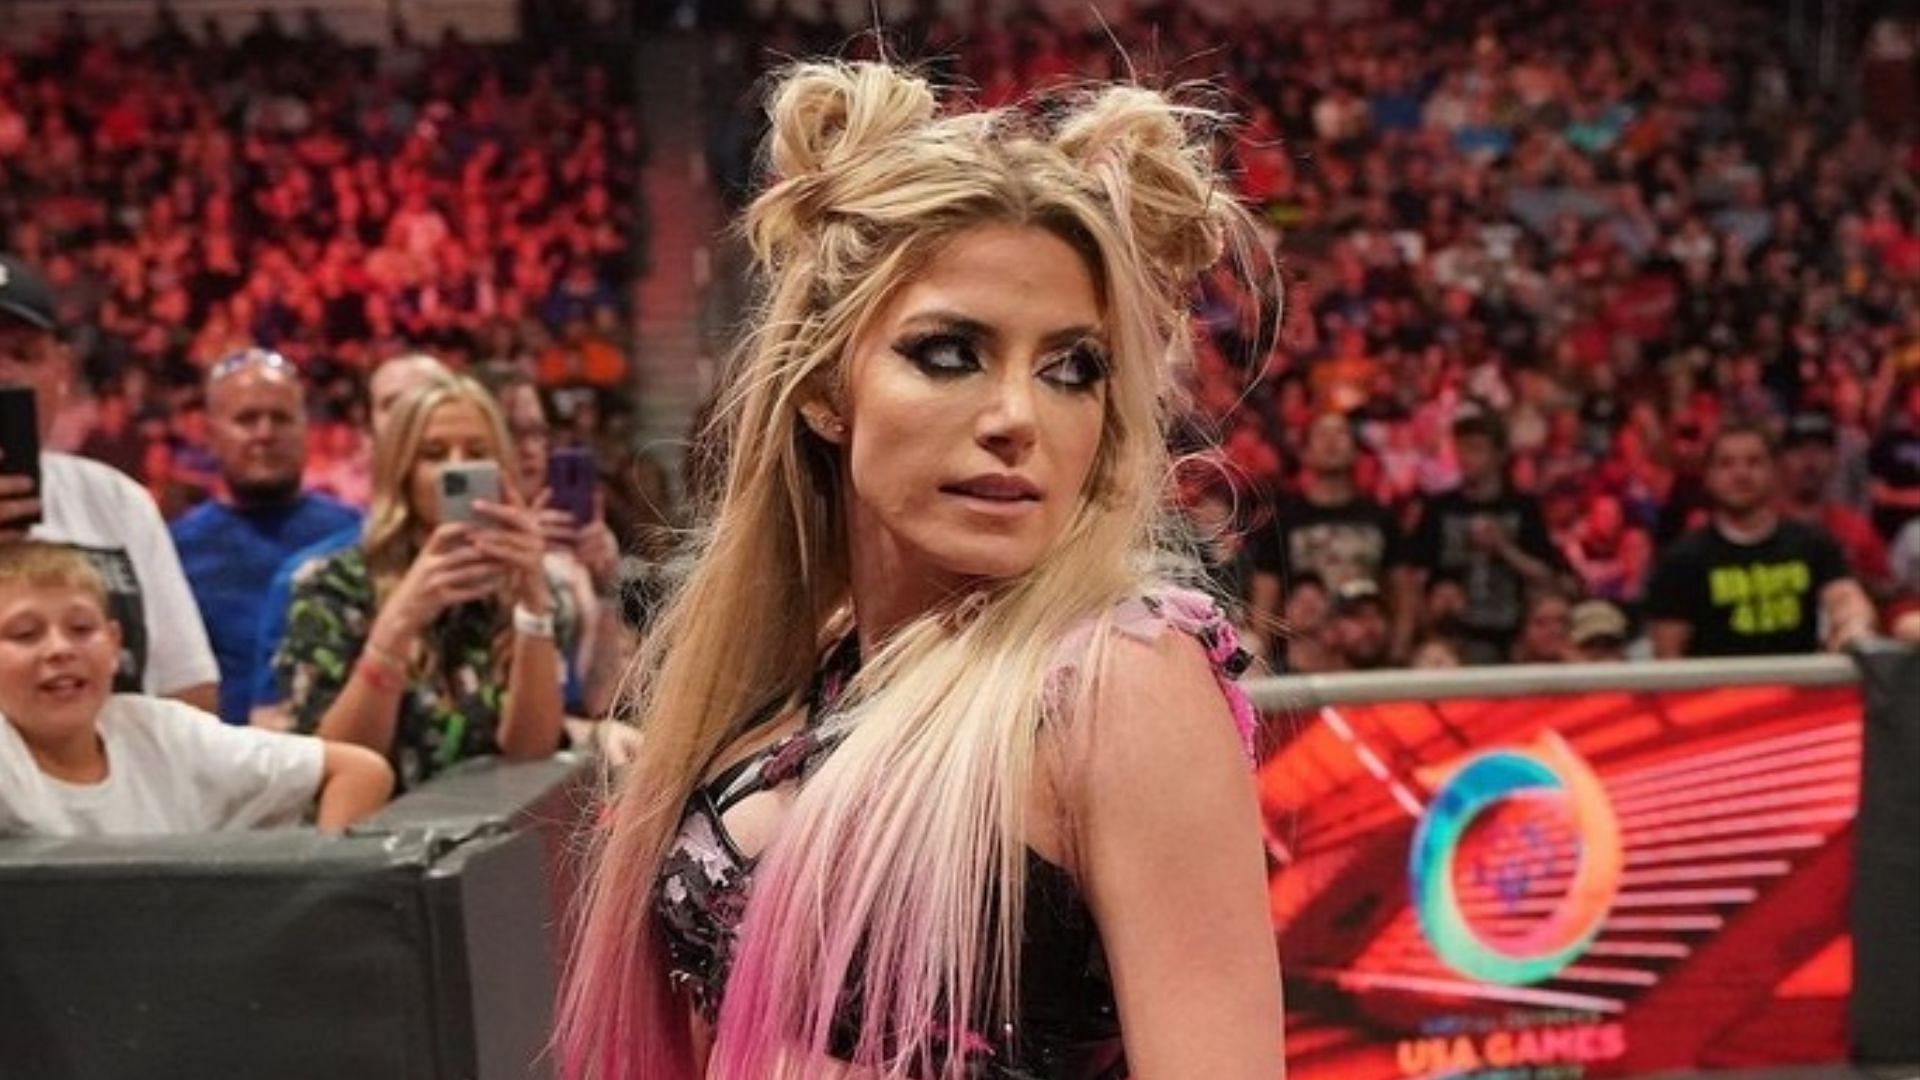 WWE Superstar Alexa Bliss is currently on maternal leave